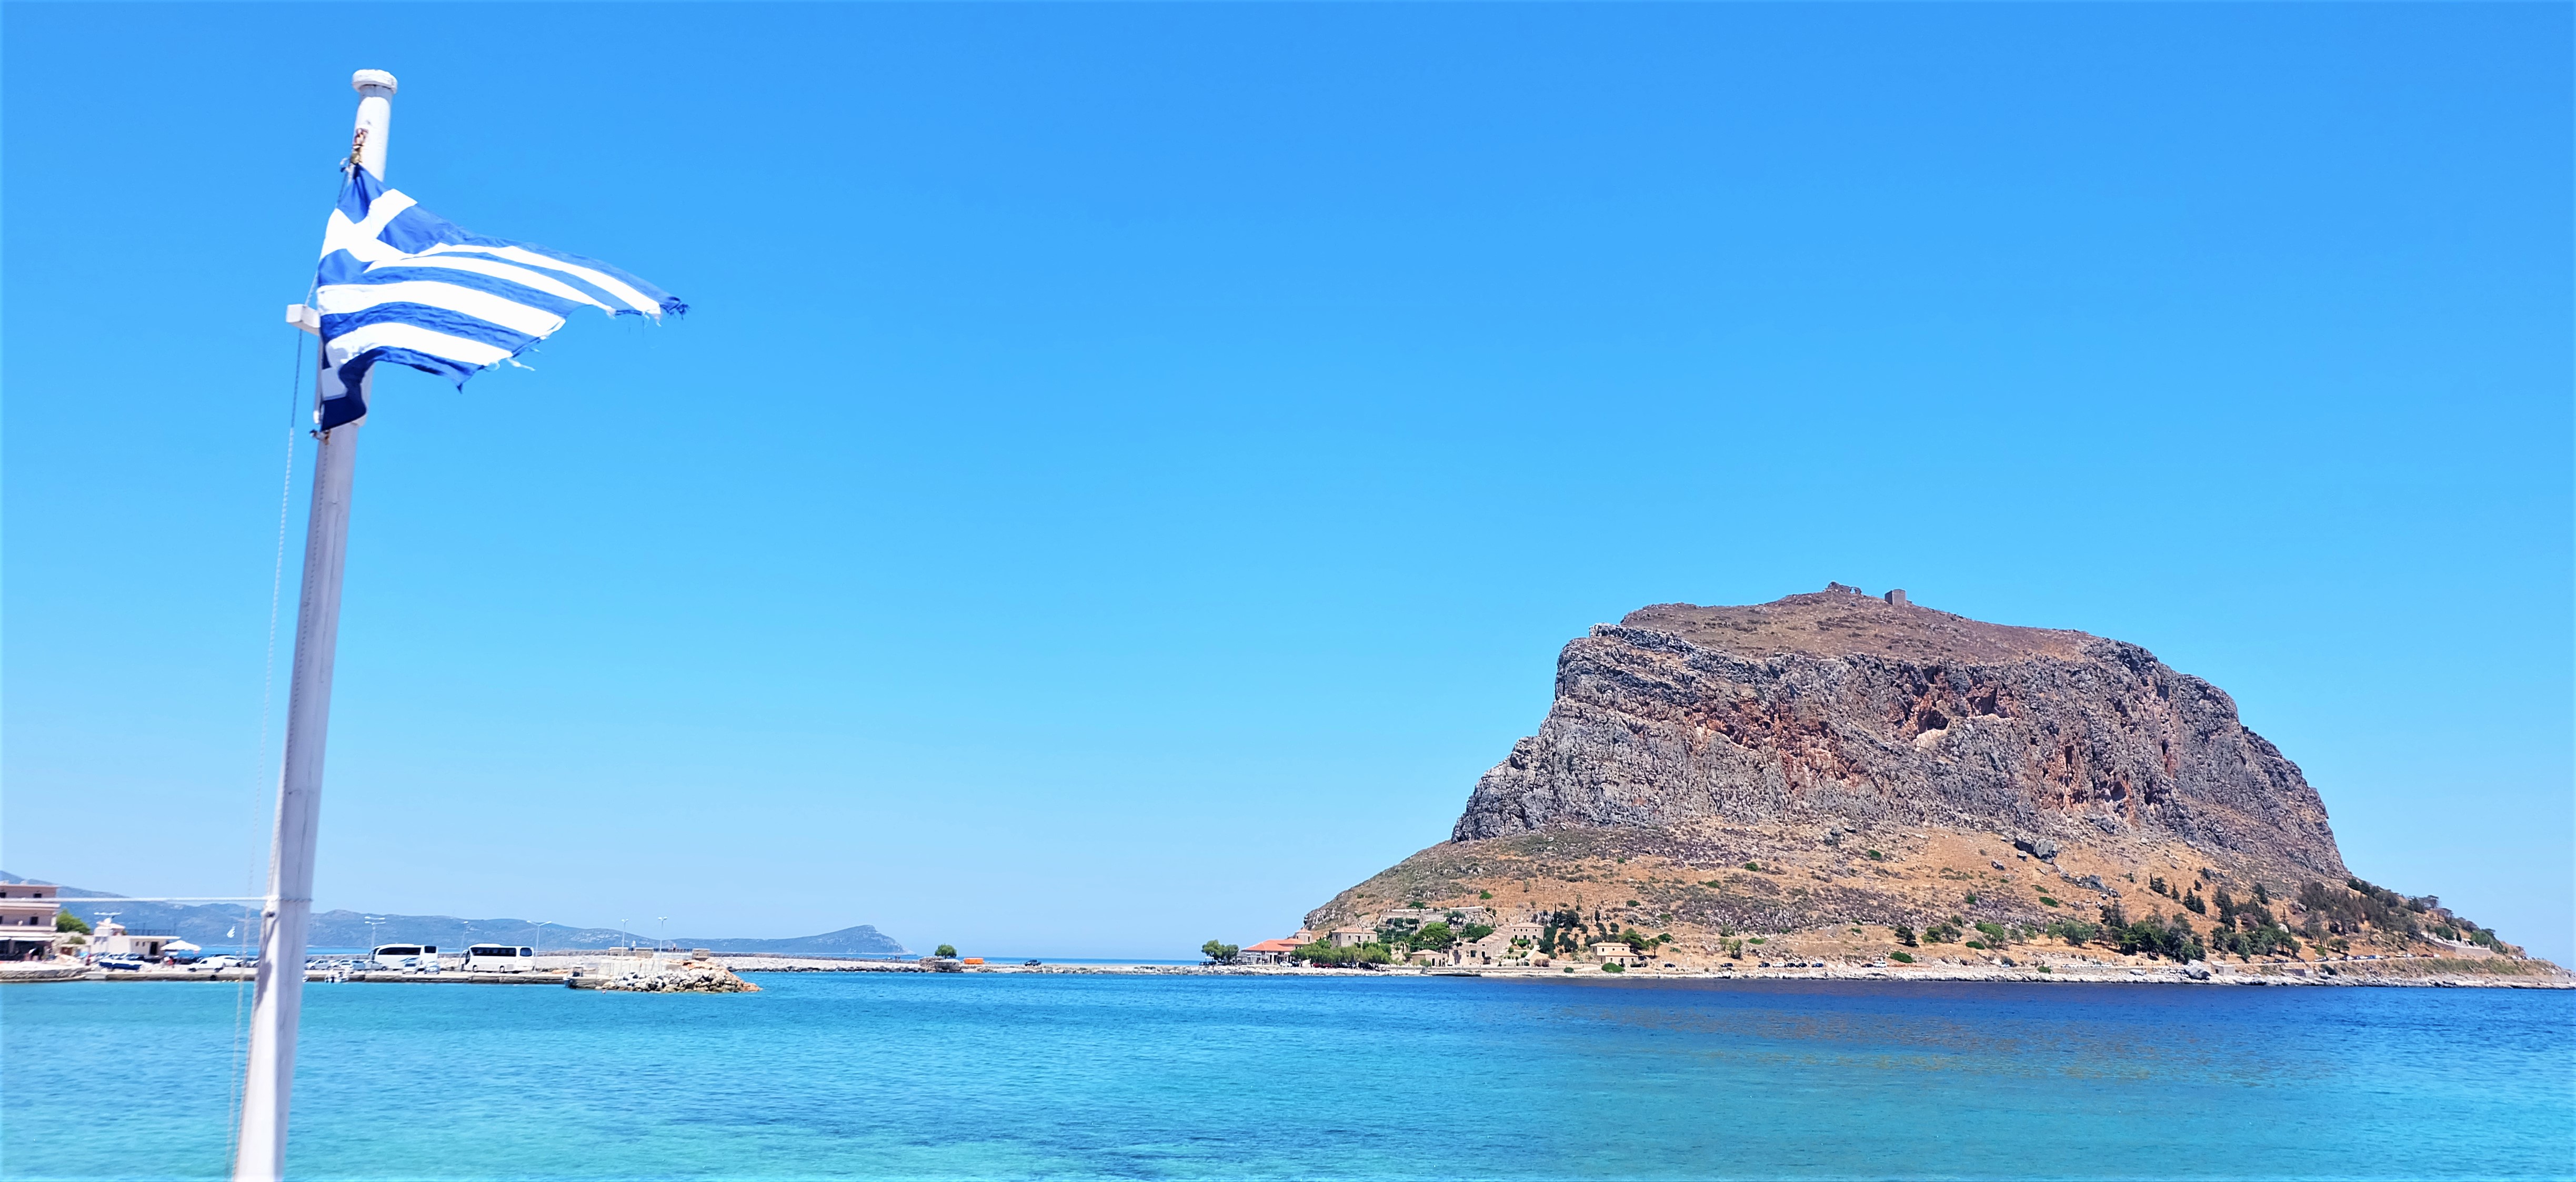 Carry It Like Harry - Monemvasia: Greece's most pictoresque four-thousand-year-old island fortress